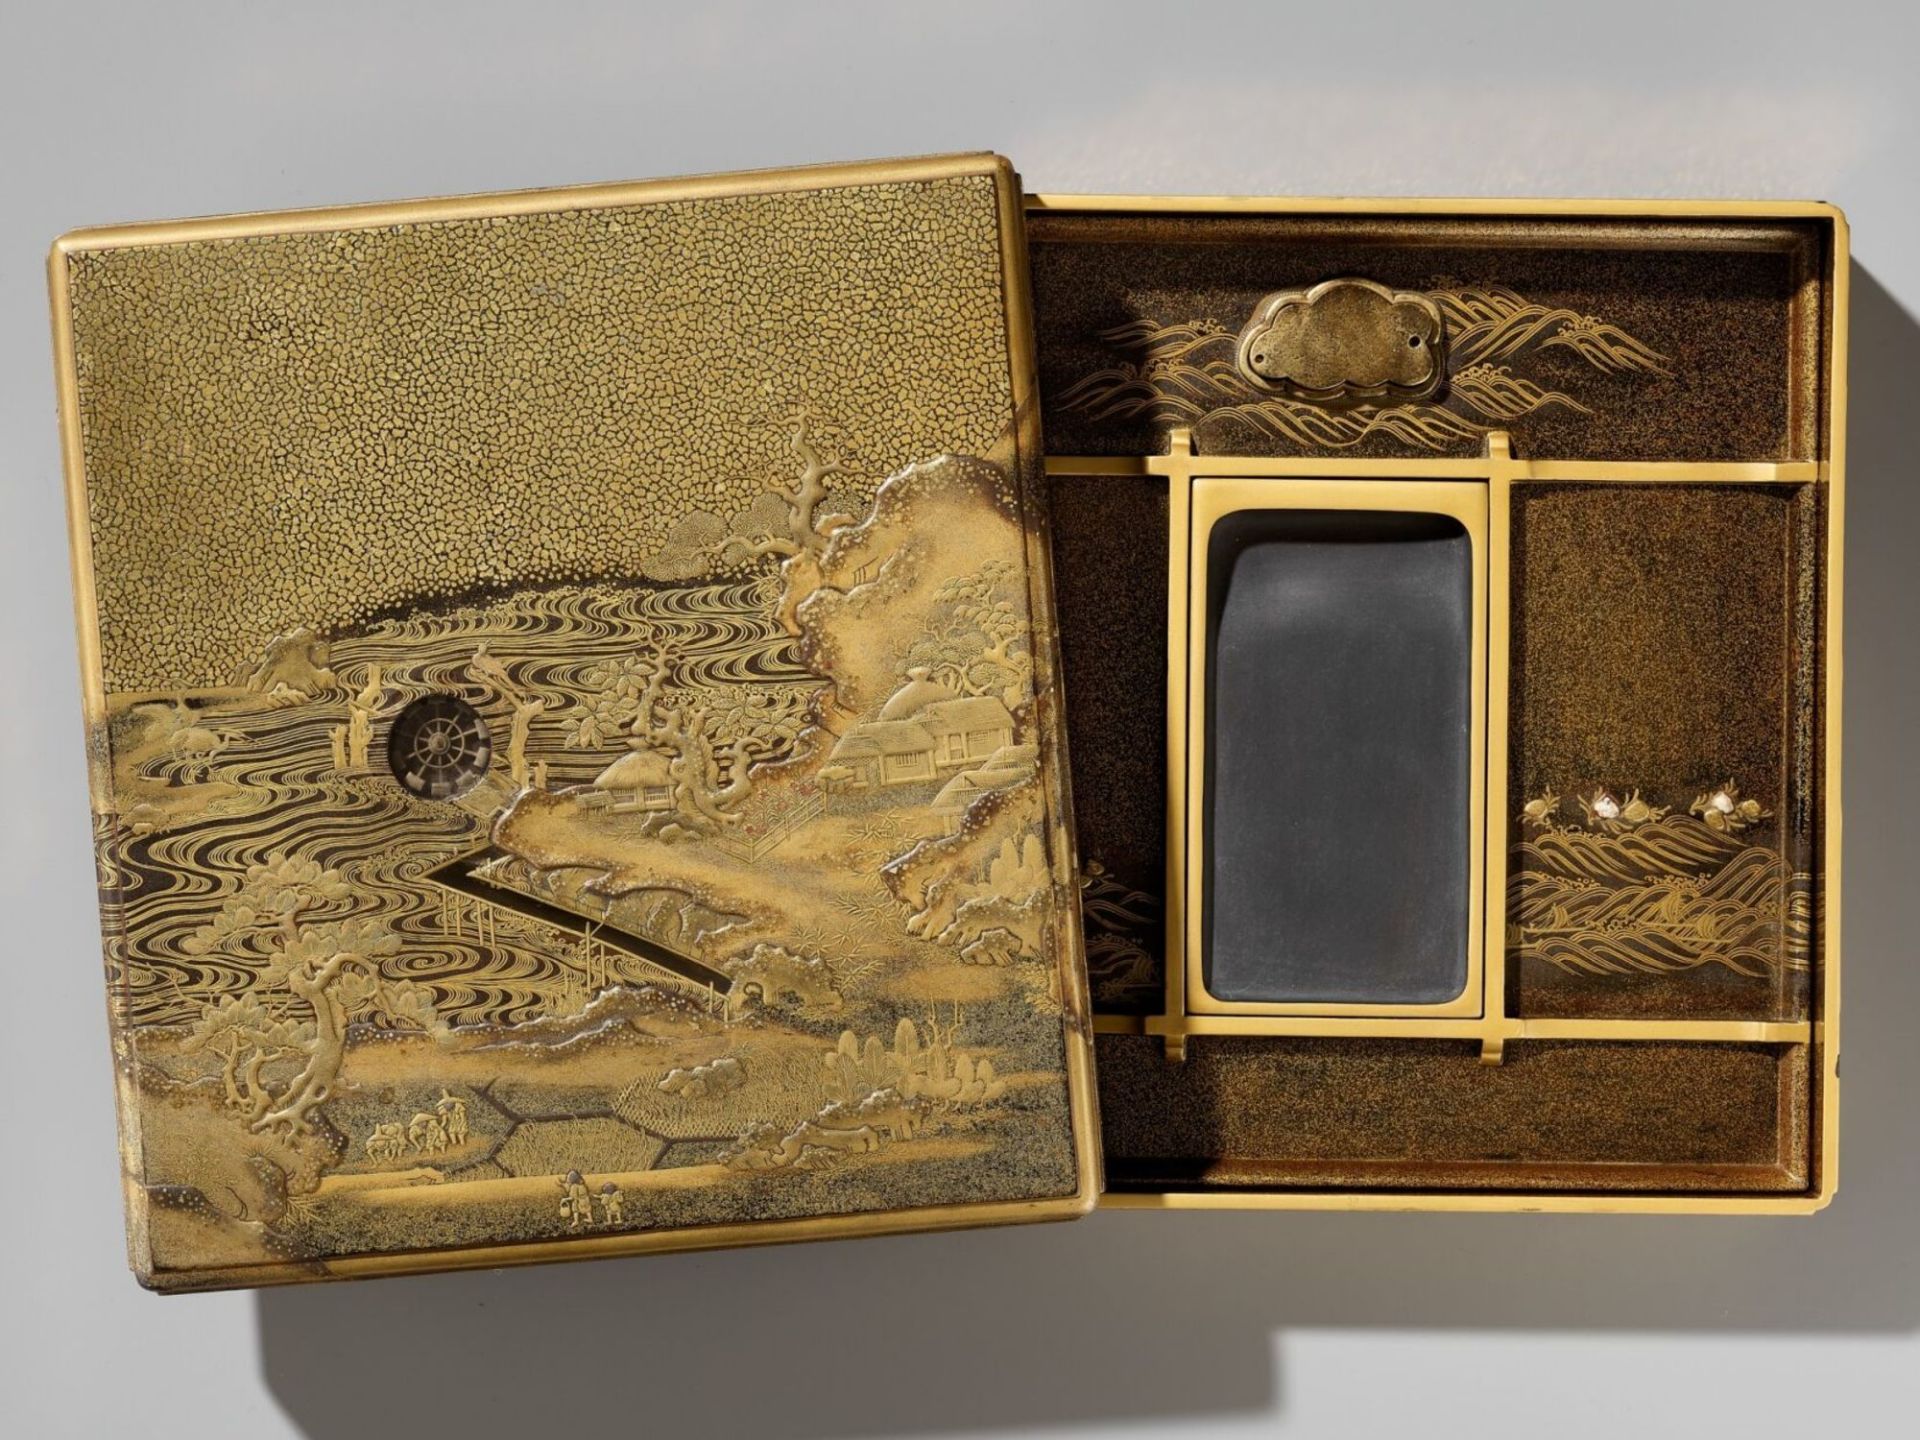 A SUPERB LACQUER SUZURIBAKO WITH A ‘WATERWHEEL’ MERCURY MECHANISM, JAPAN, SECOND HALF OF 18TH CENTUR